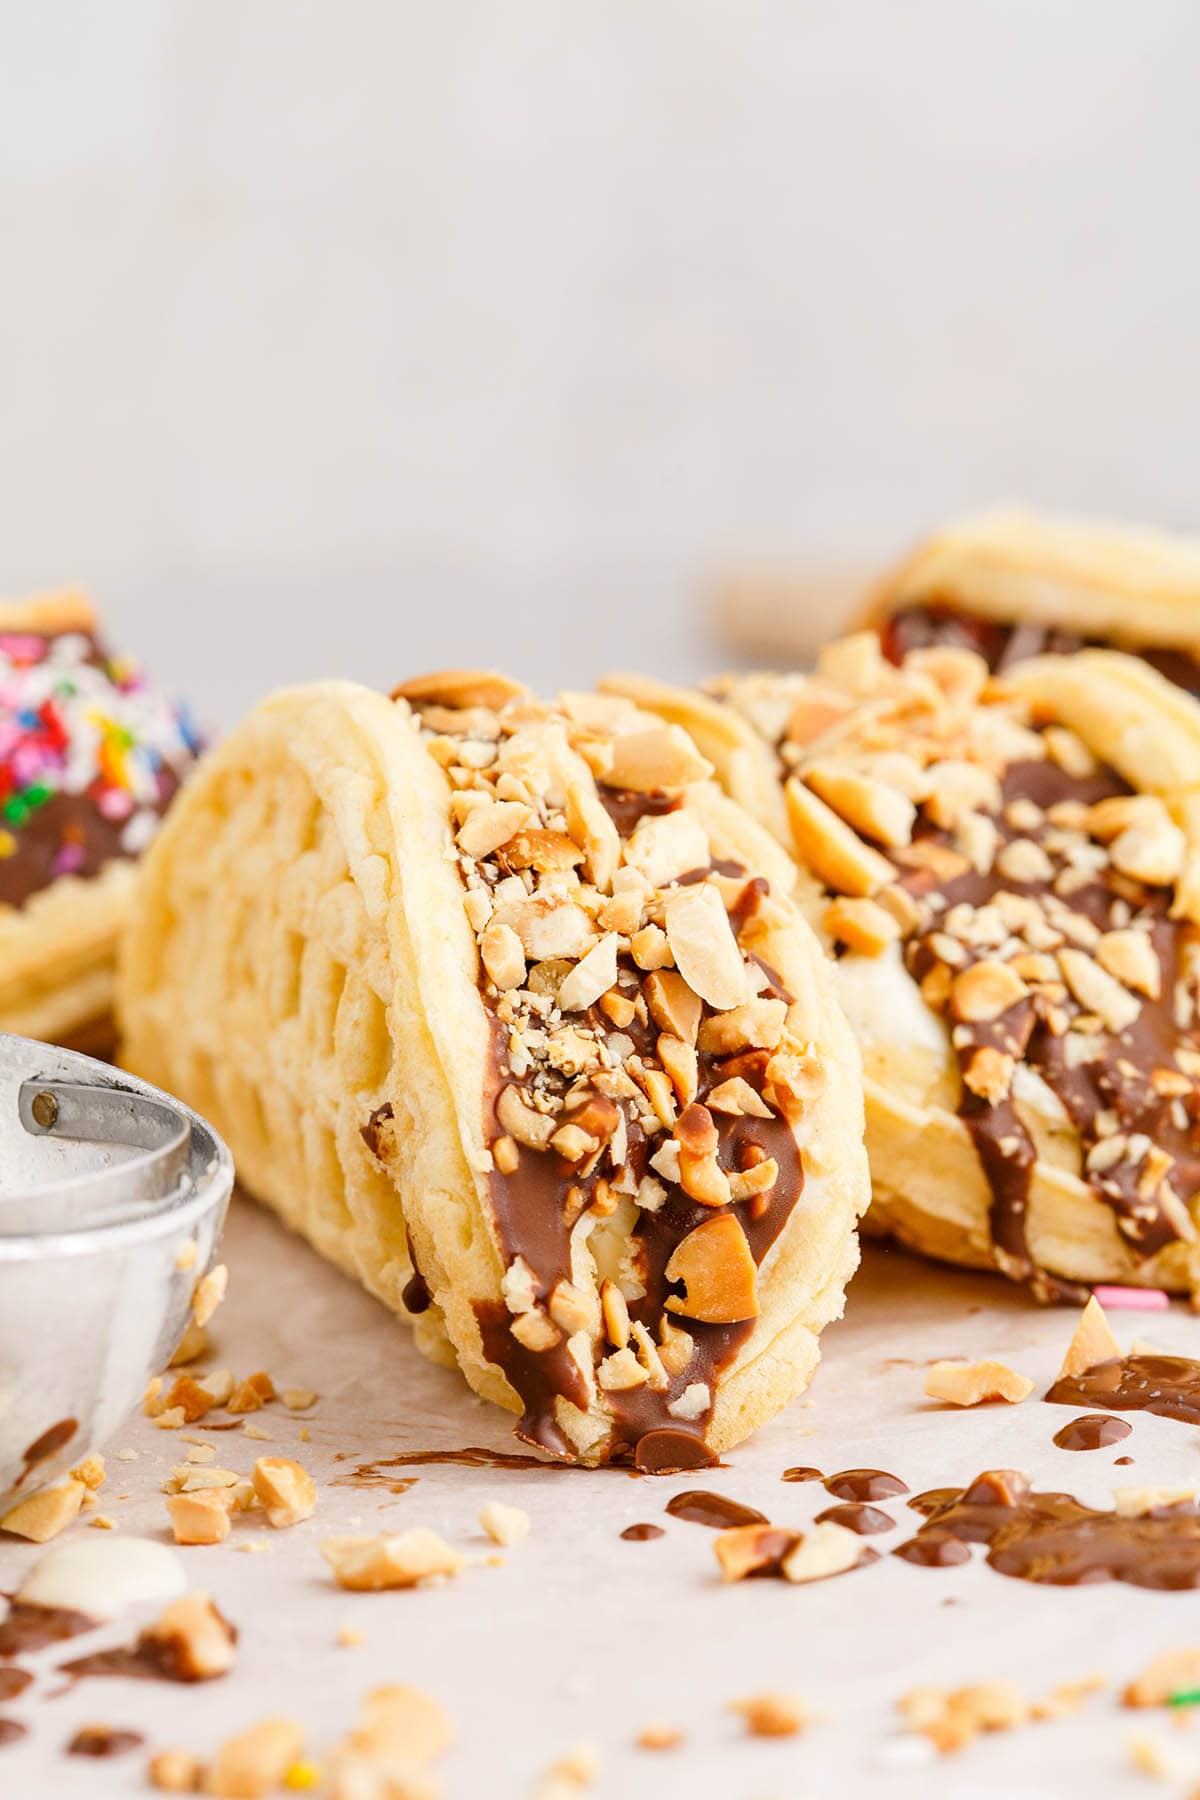 Choco Tacos with toppings